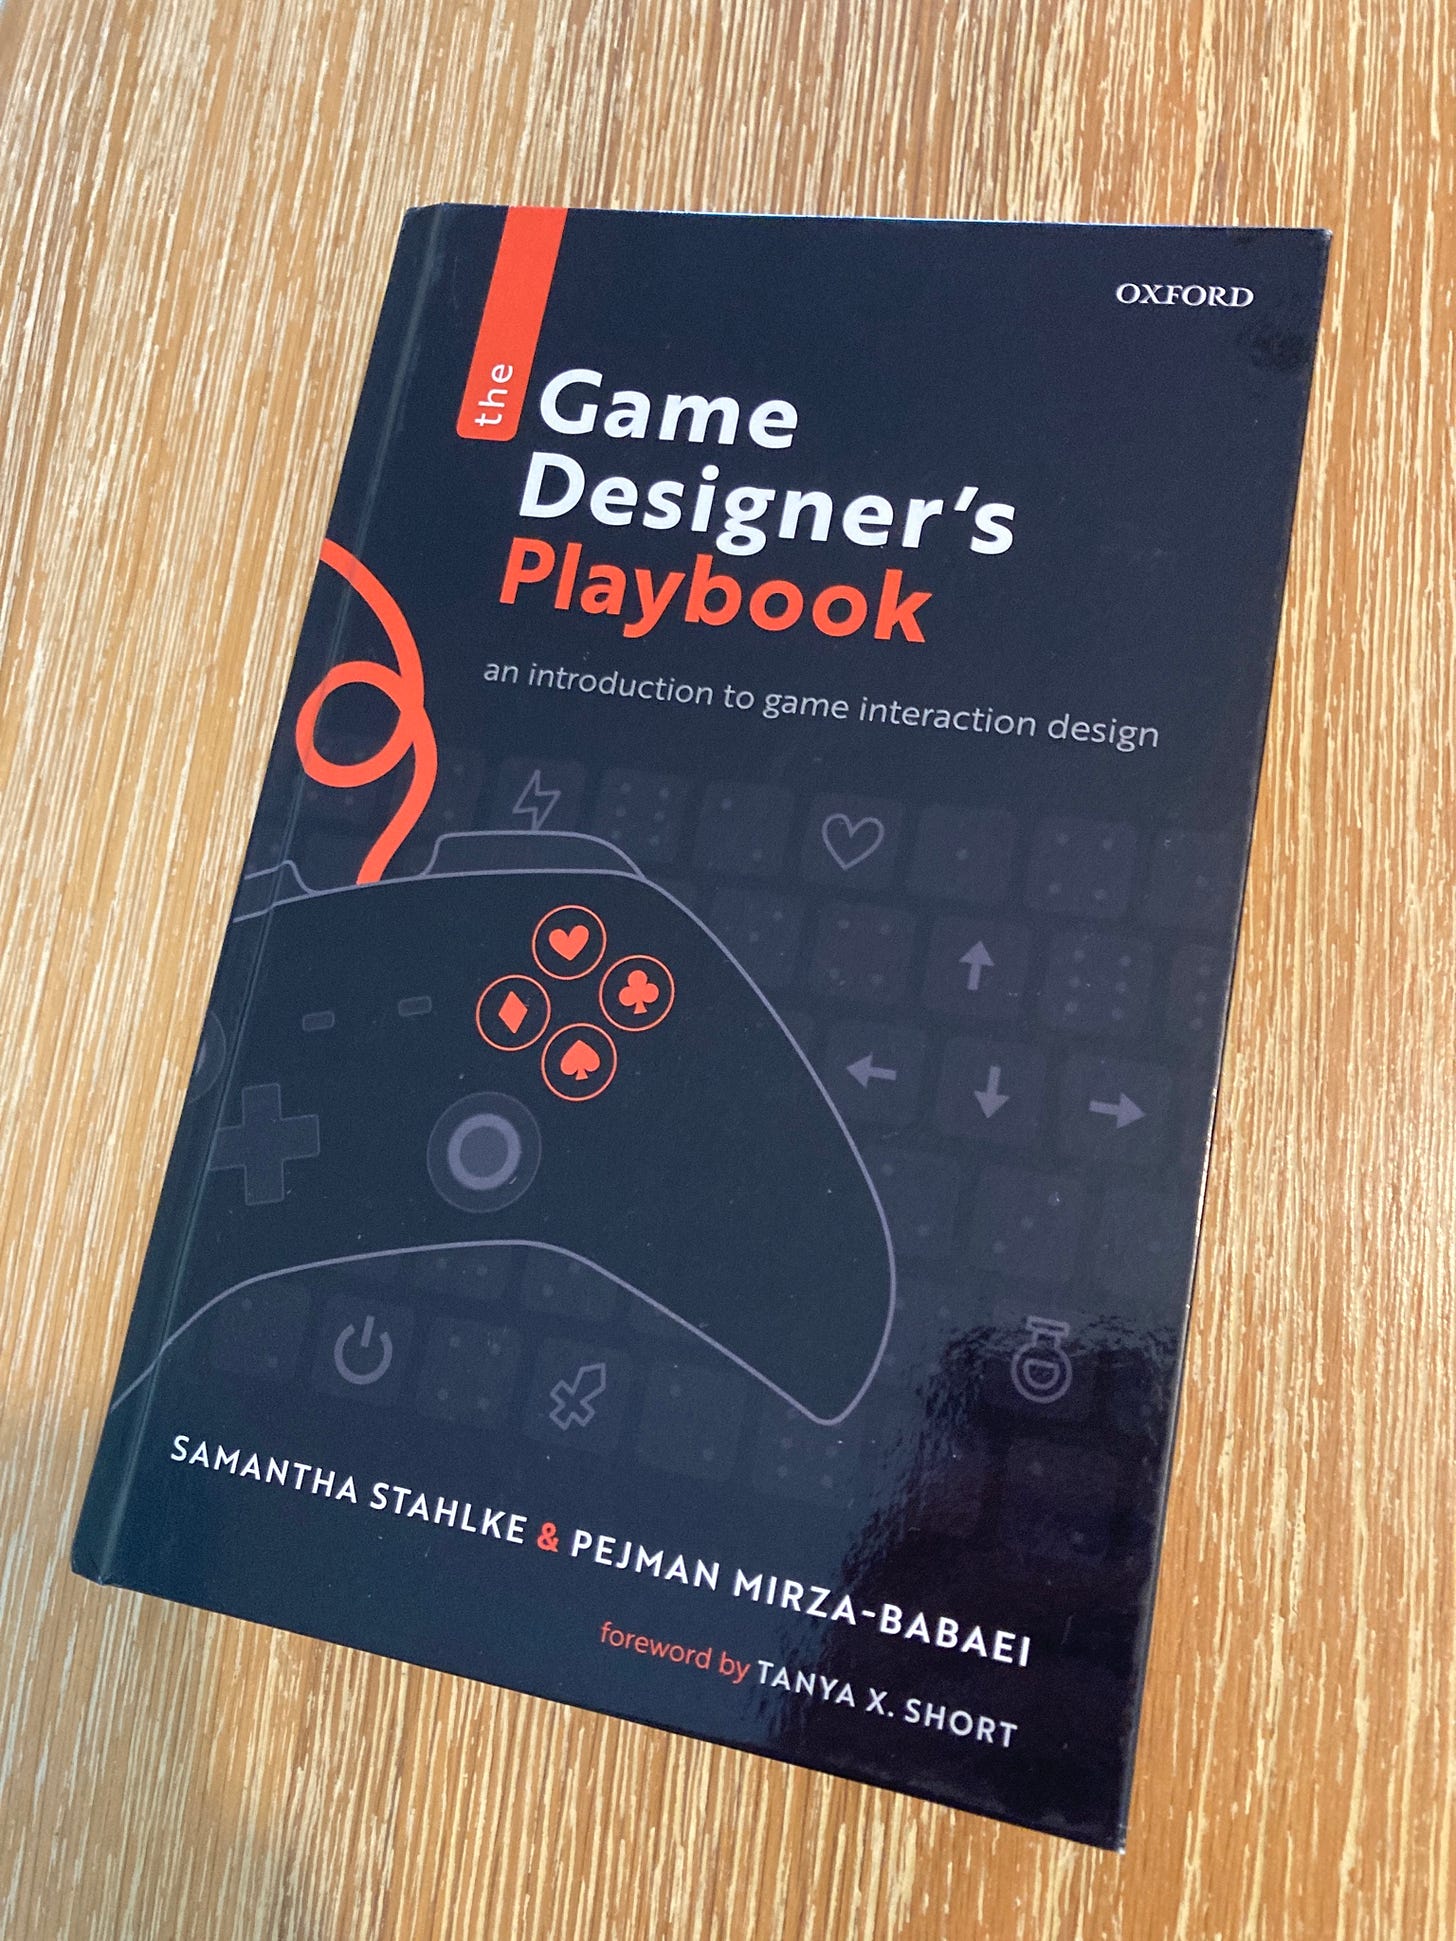 The Game Designers Playbook